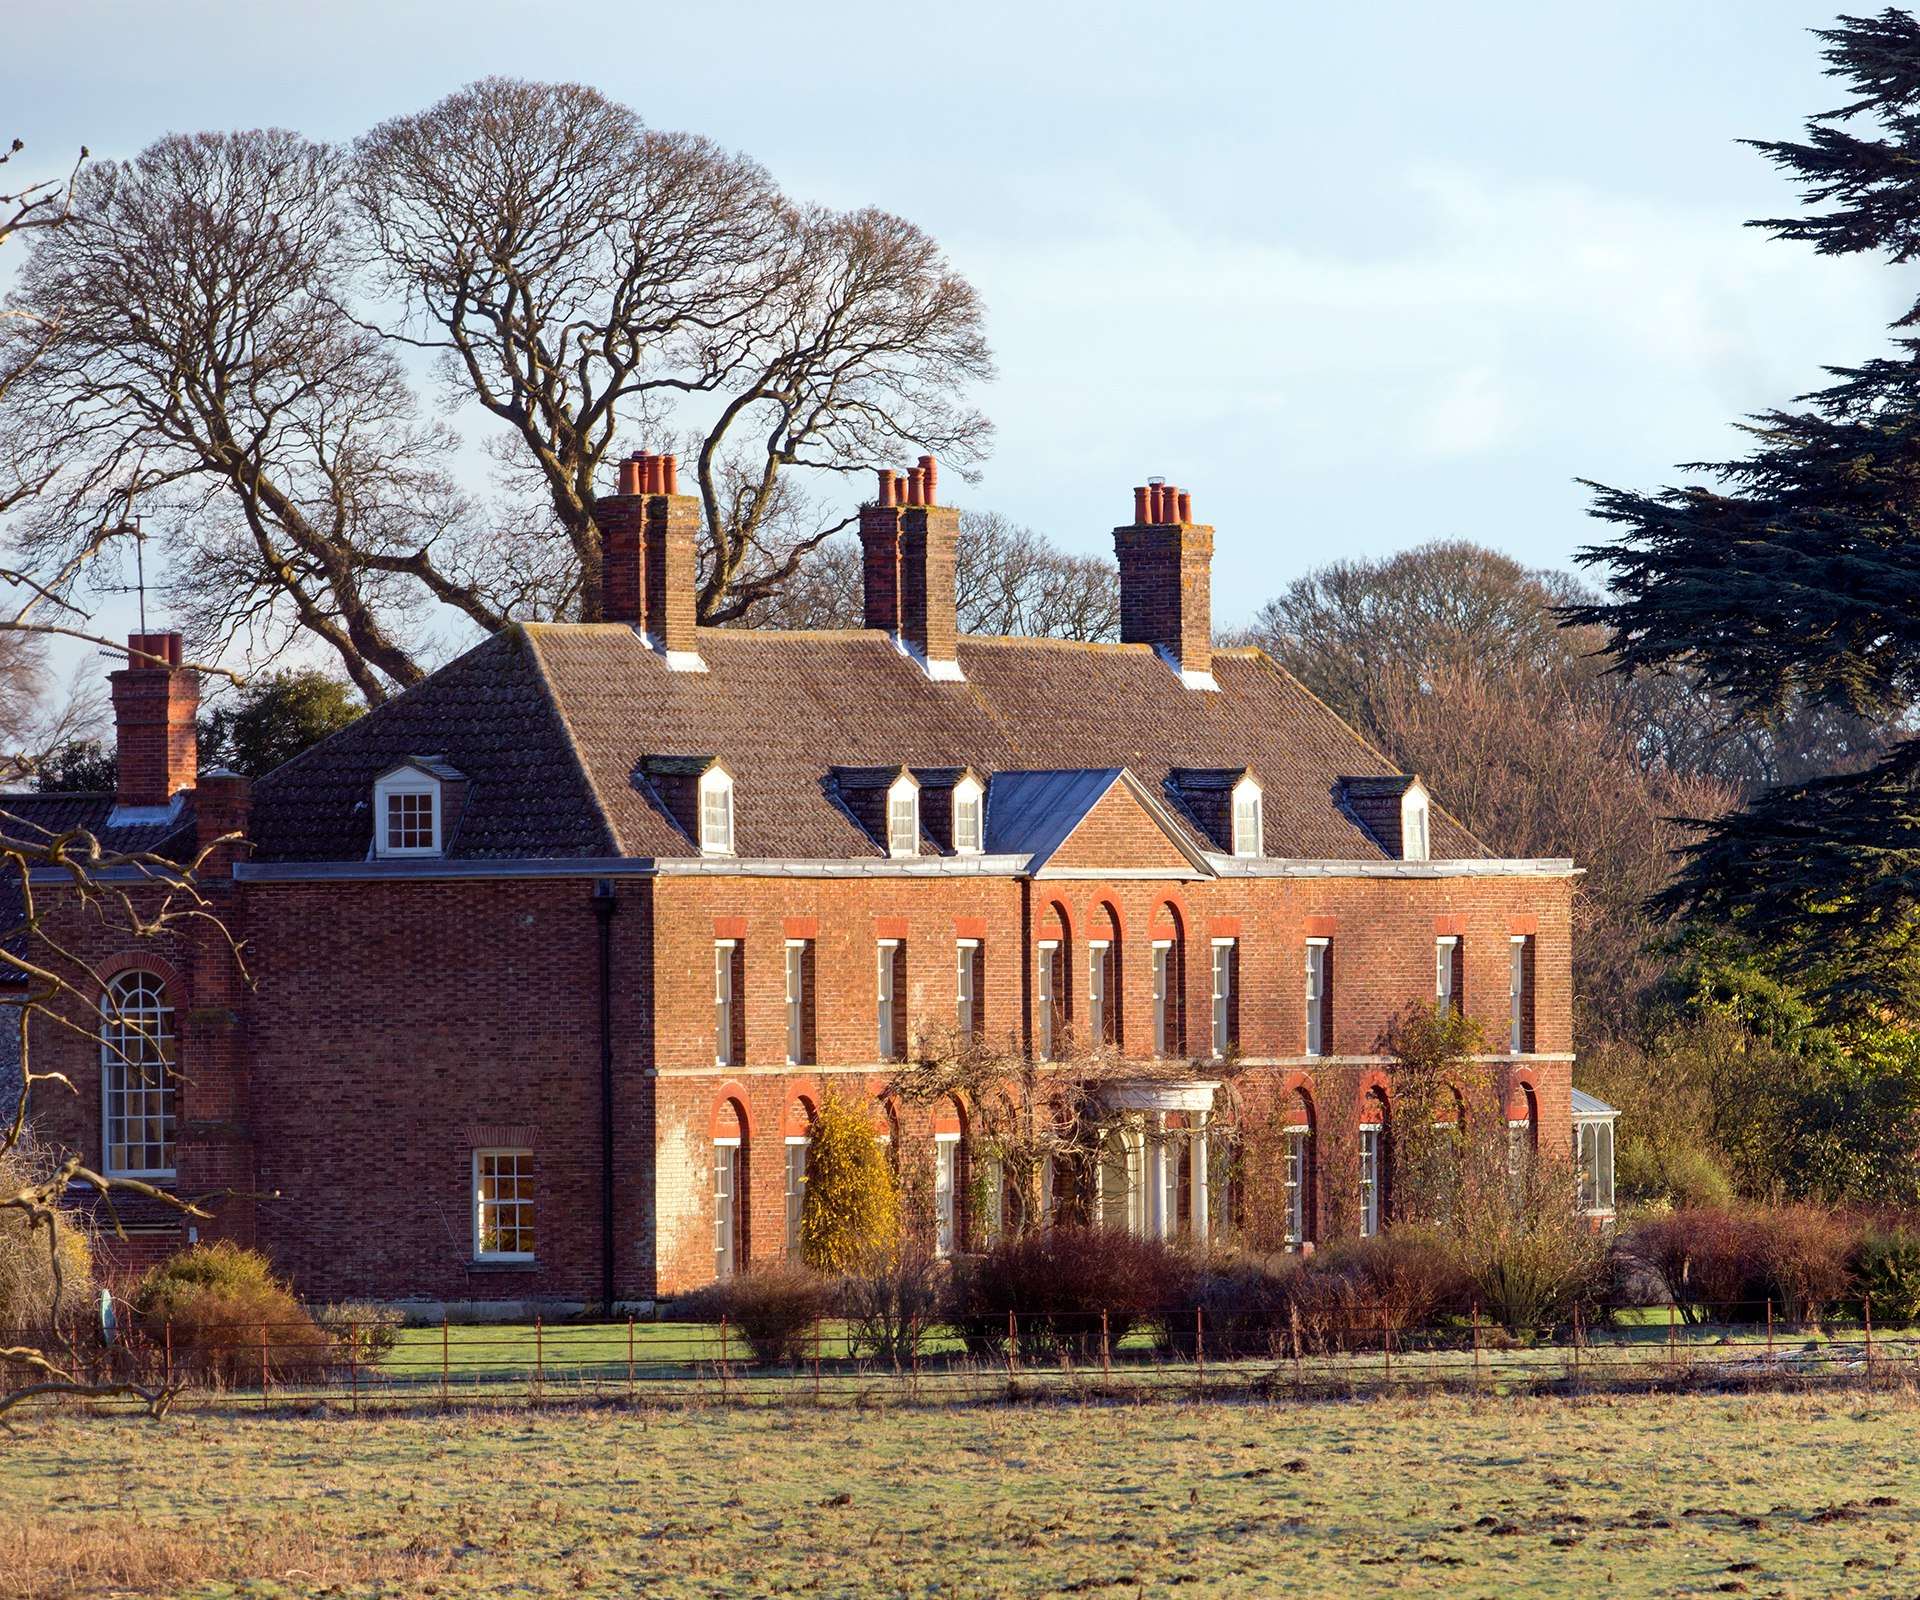 homes owned by the British royal family: Anmer Hall